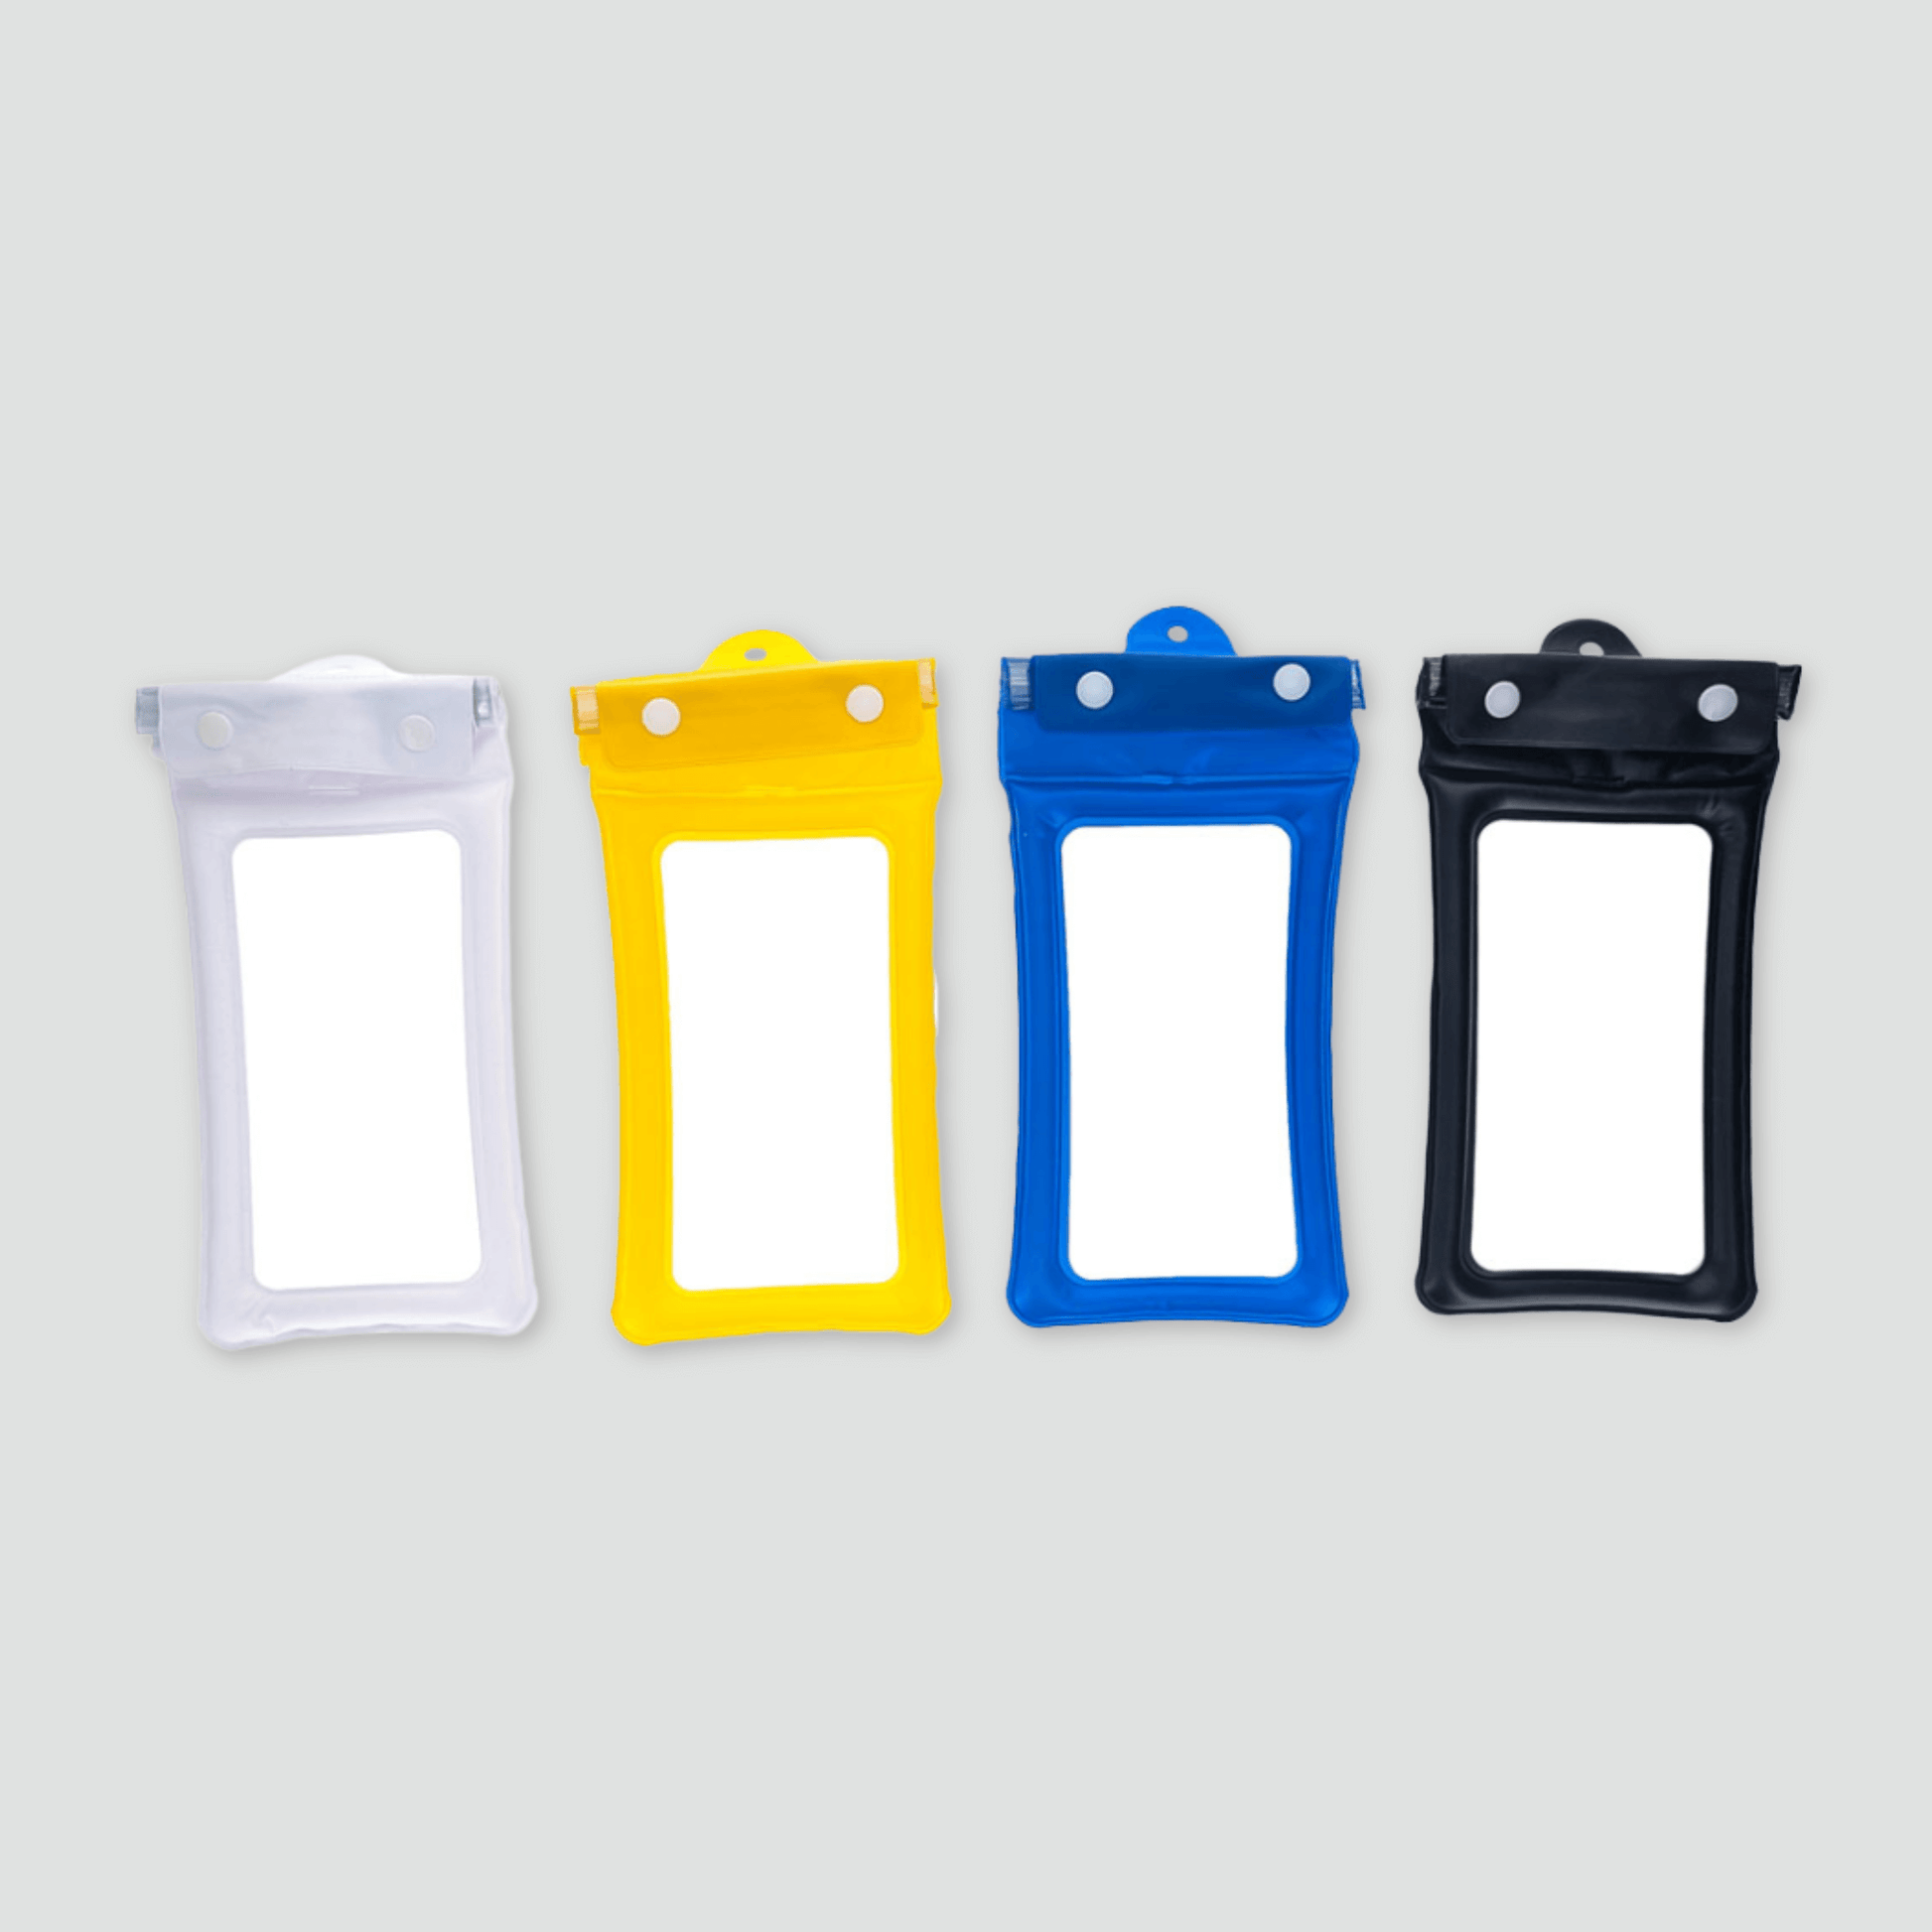 all Waterproof Phone Pouch colour ways